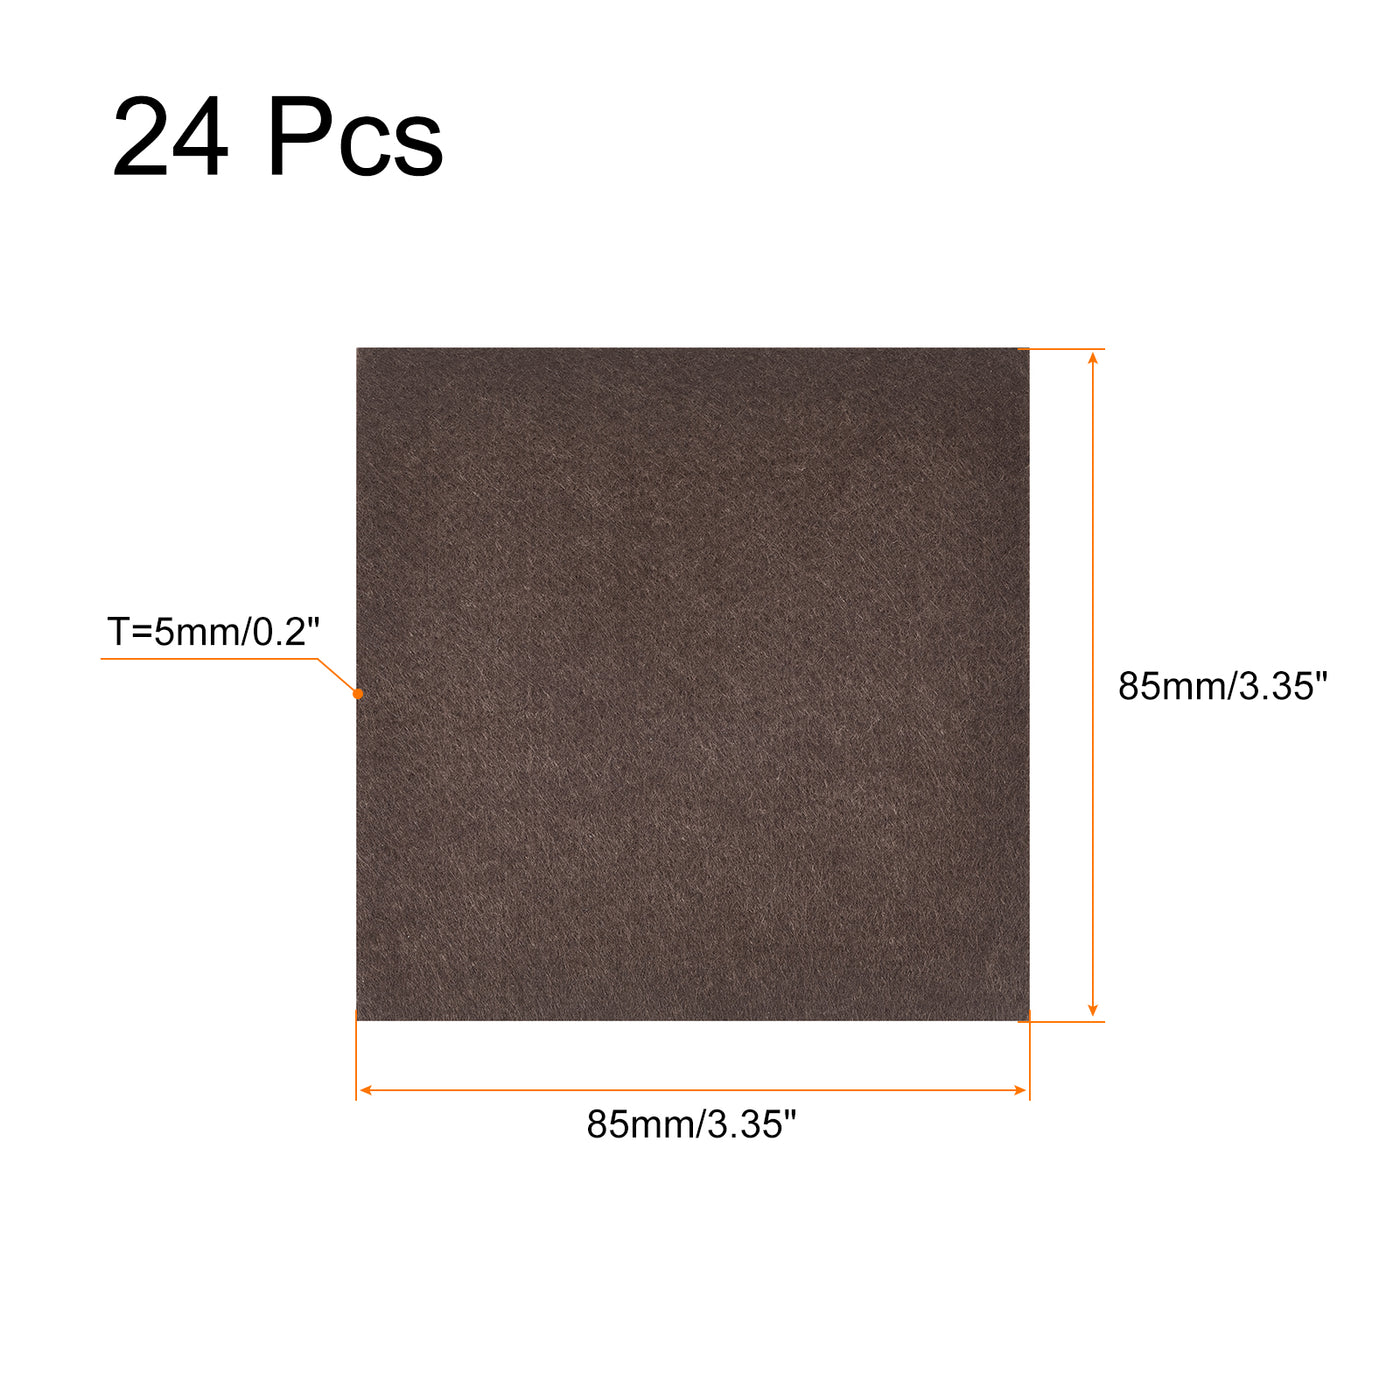 uxcell Uxcell Felt Furniture Pads, 85mm x 85mm Self Adhesive Square Floor Protectors for Furniture Legs Hardwood Floor, Brown 24Pcs